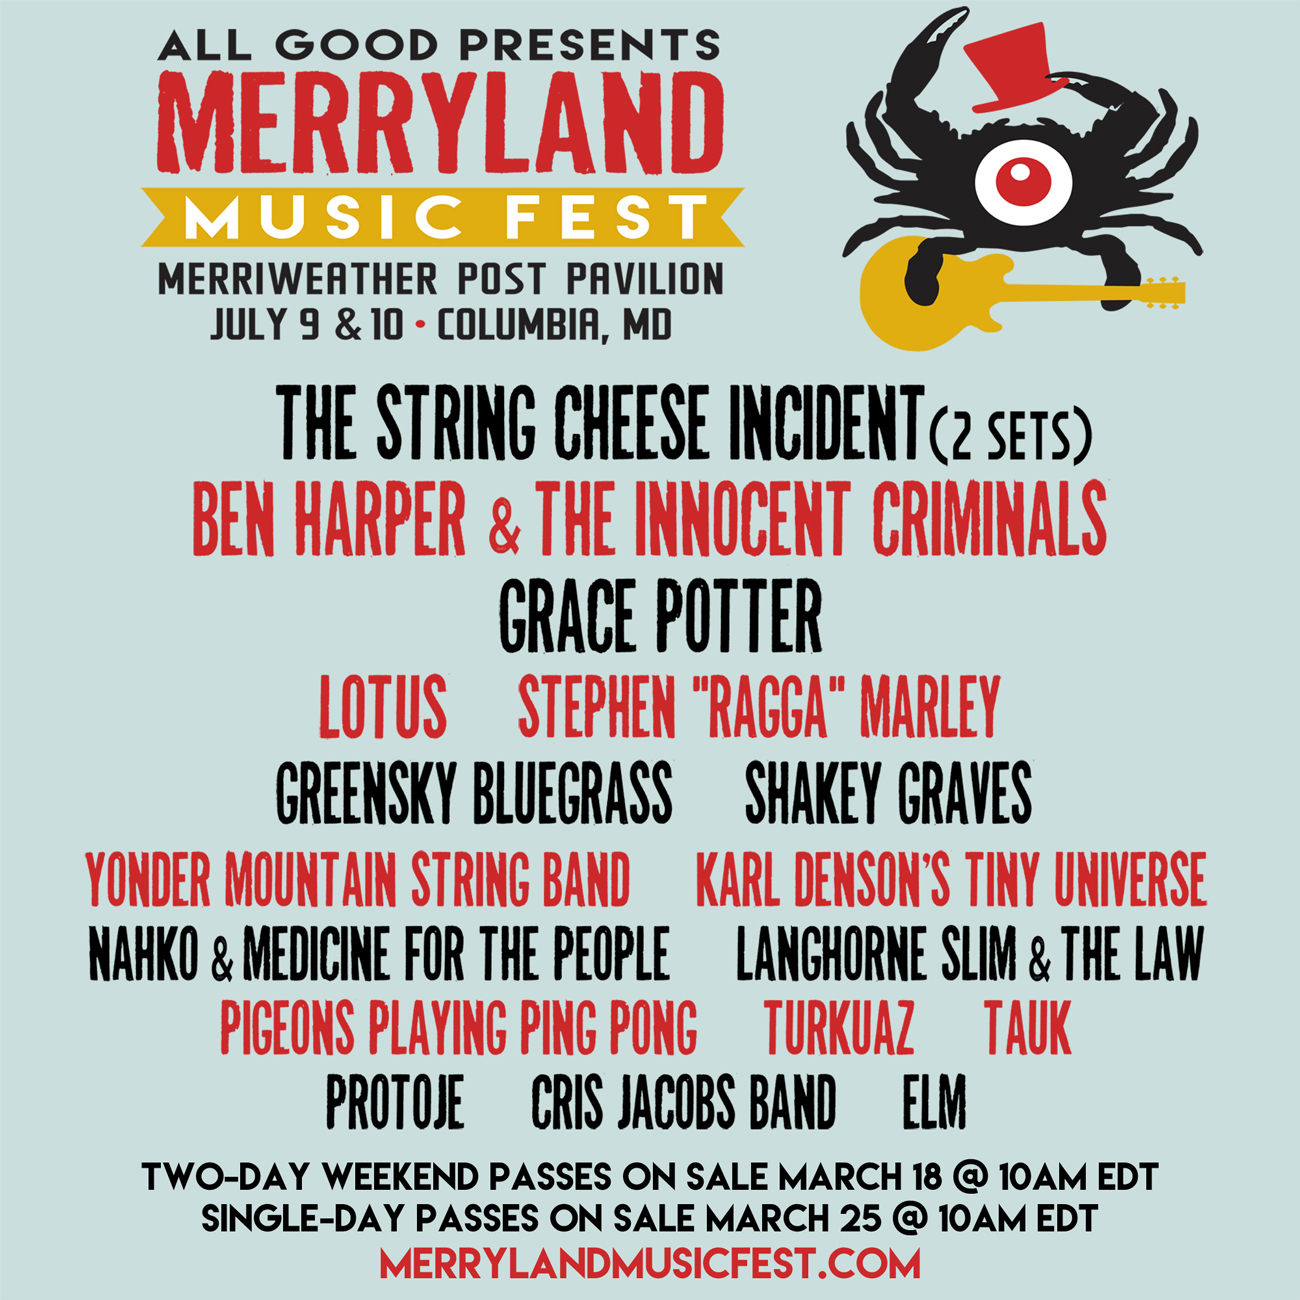 Merryland Music Fest 2016 lineup. Photo provided.